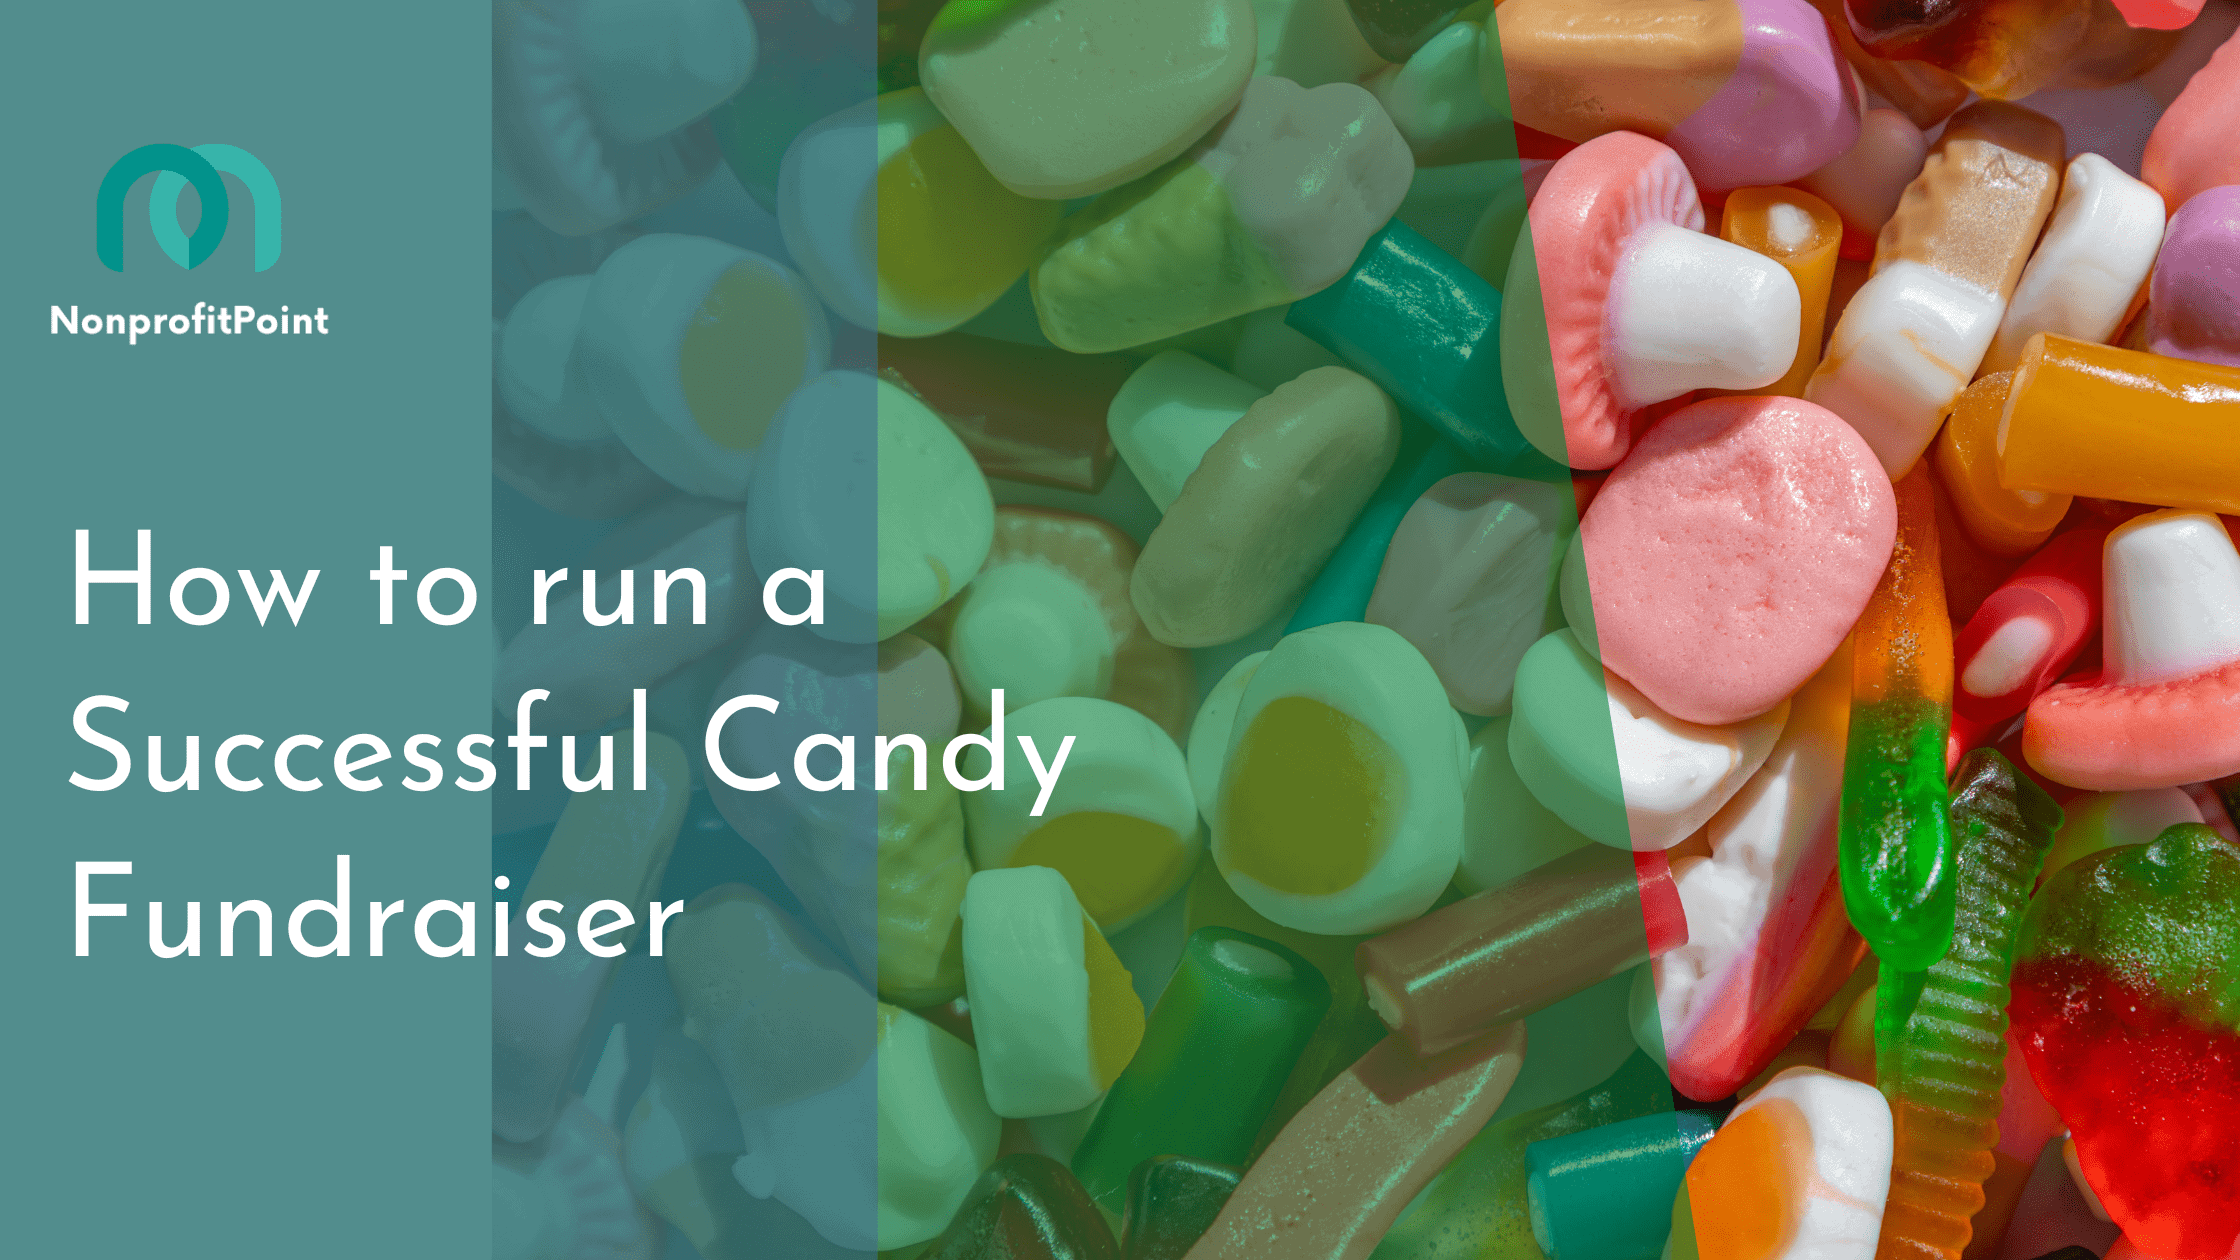 How to run a Successful Candy Fundraiser